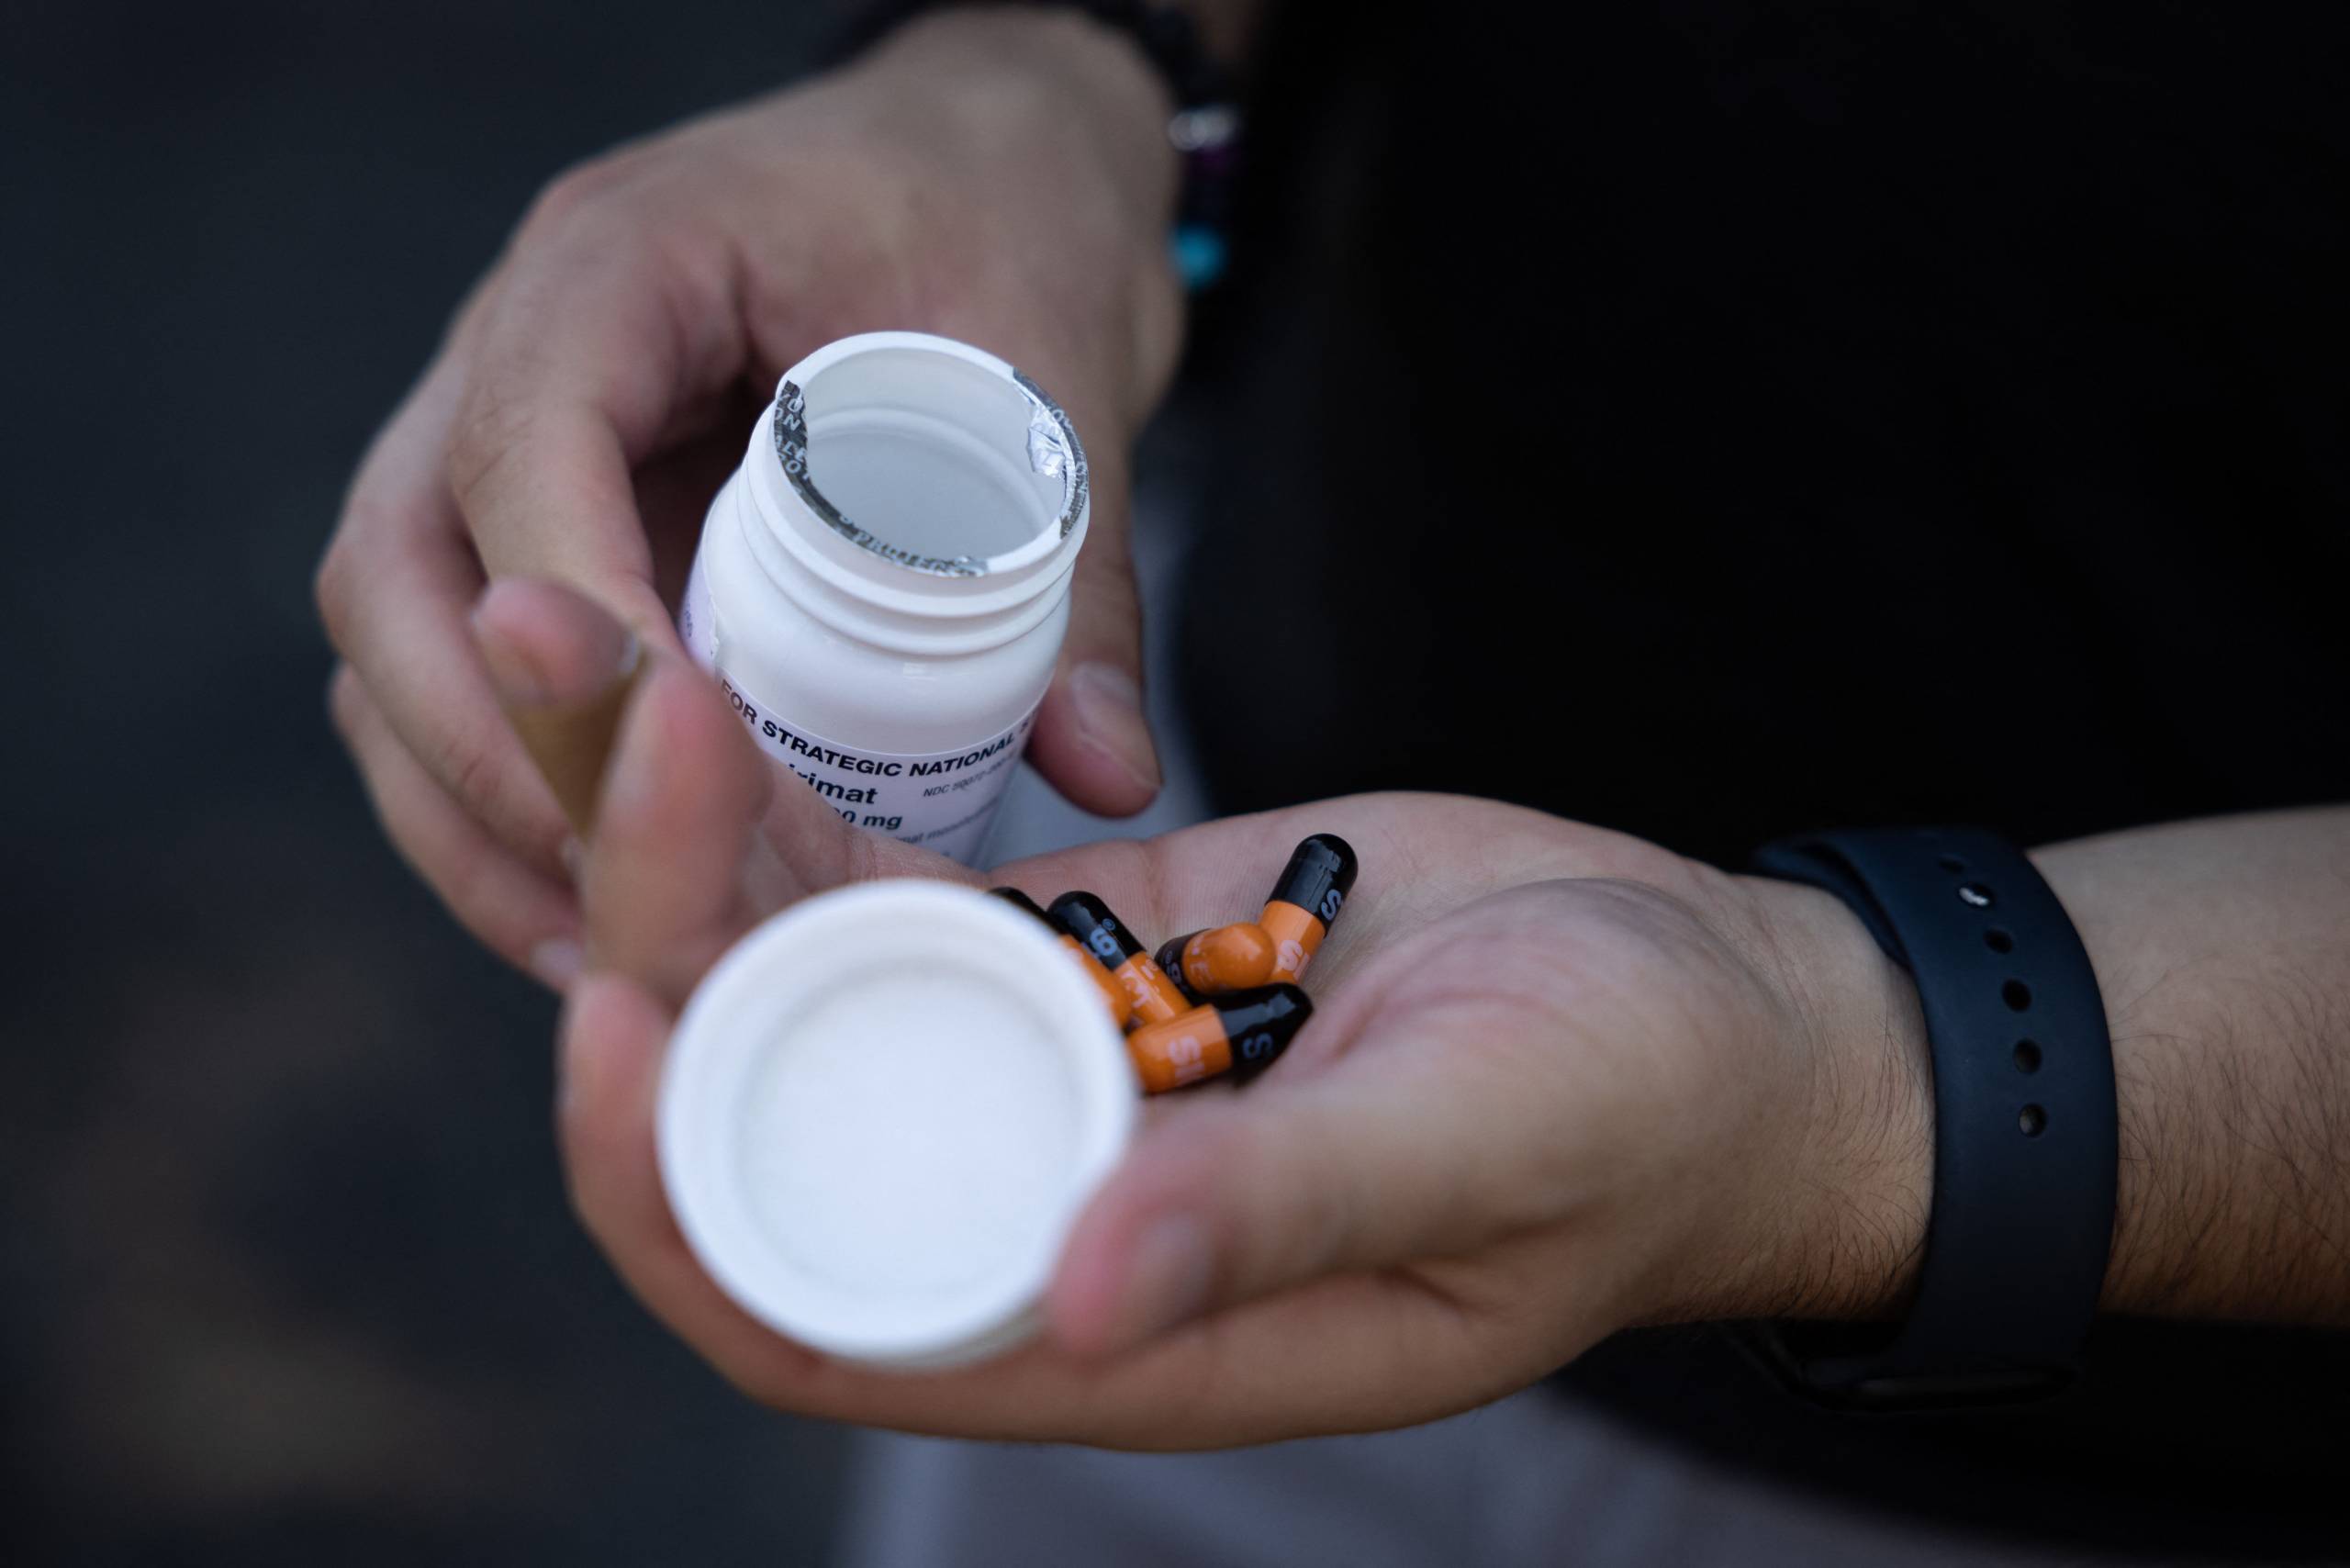 A person empties out the pills from a prescription pill cartridge on to their other hand.